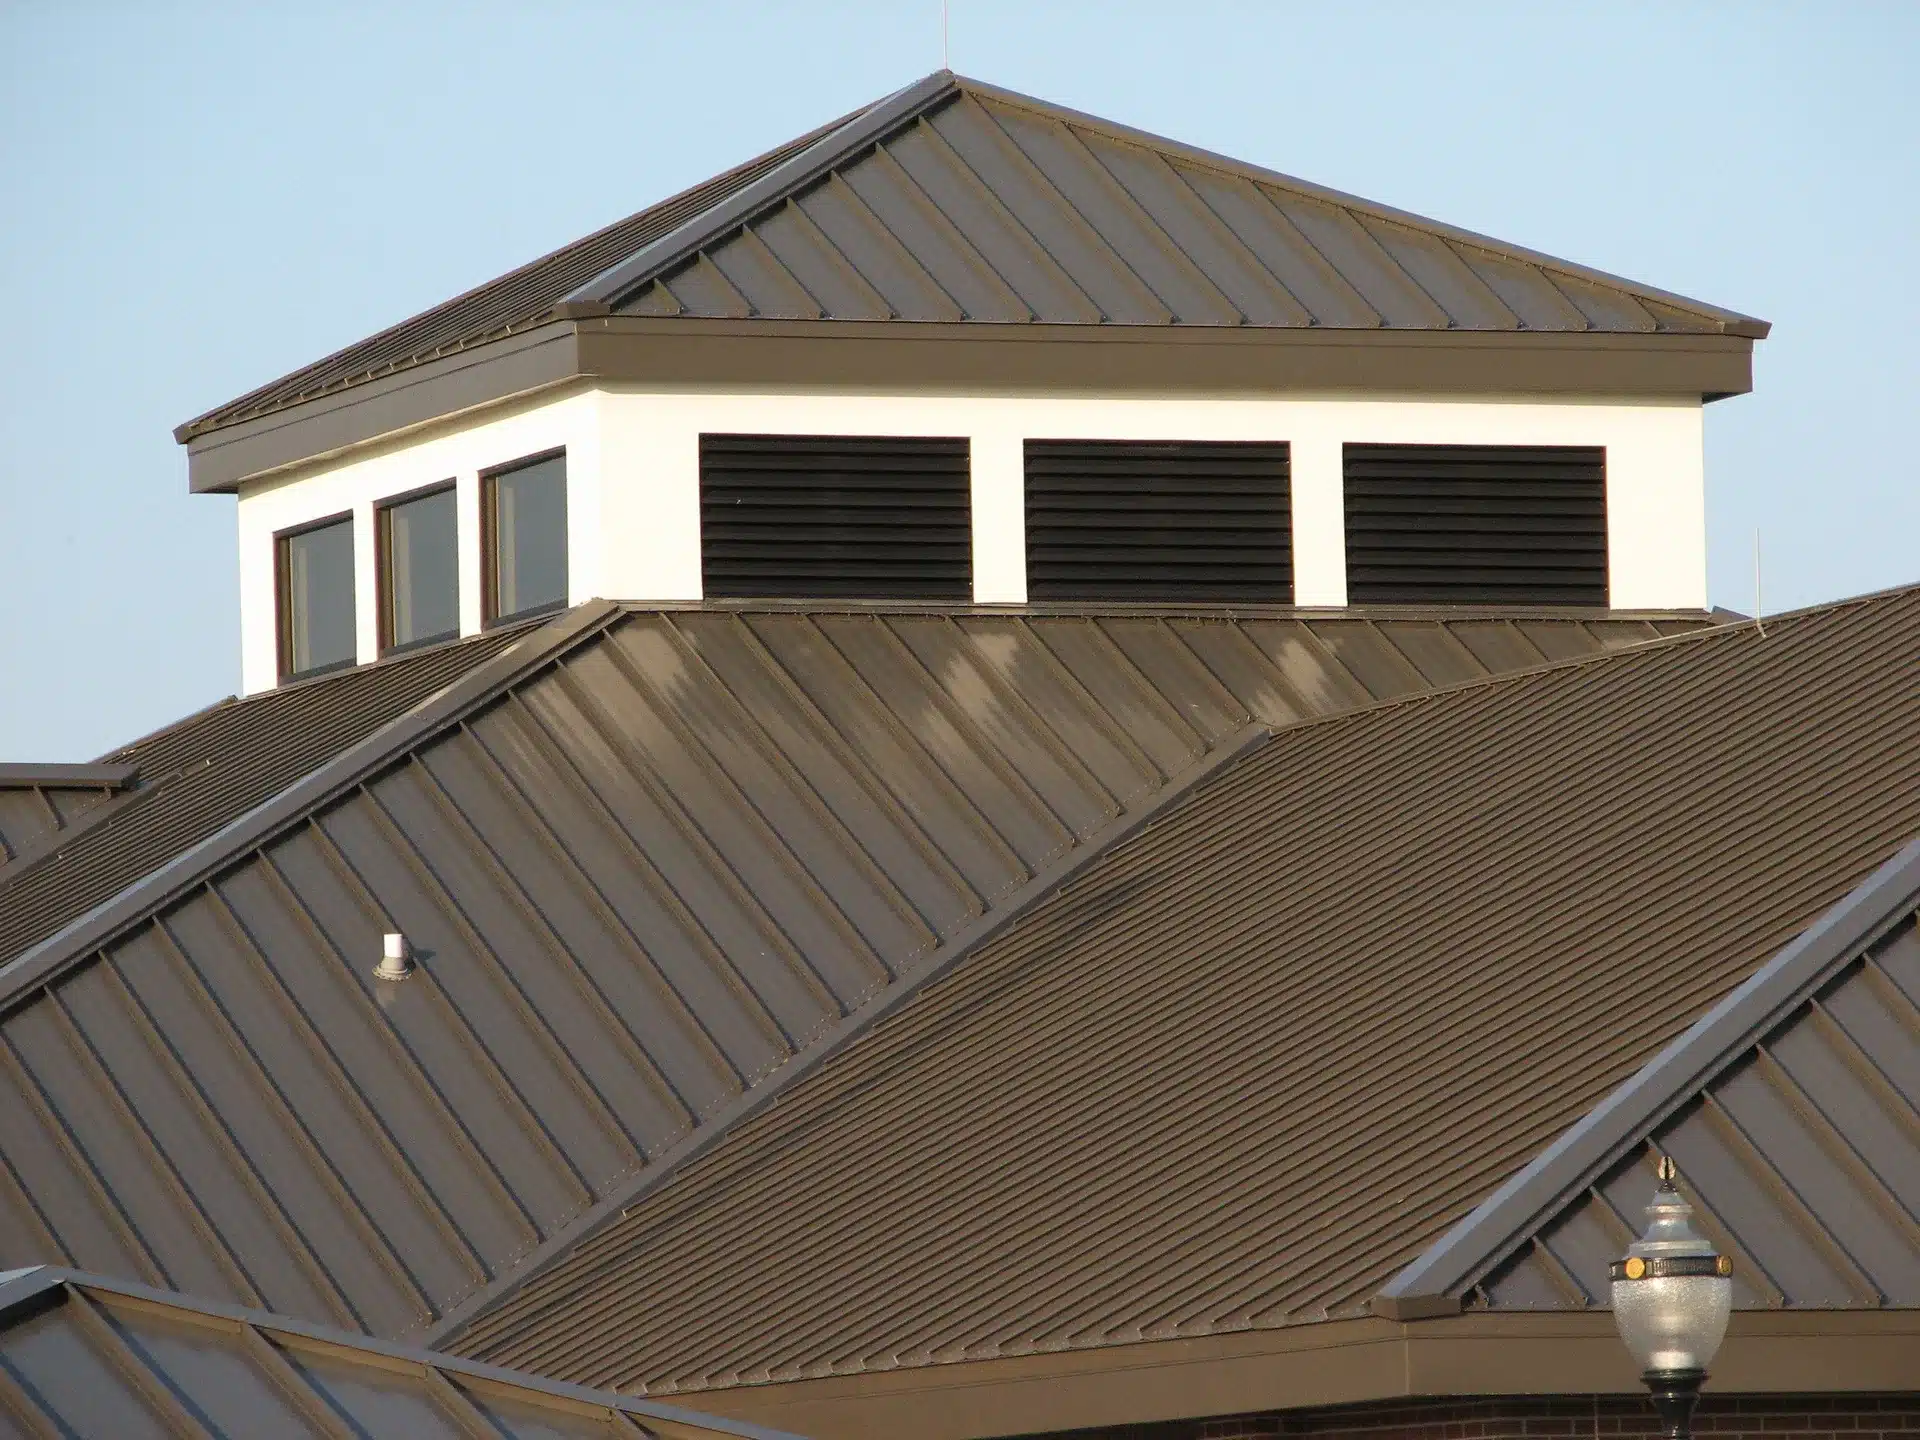 How To Install Ridge Cap On Metal Roof